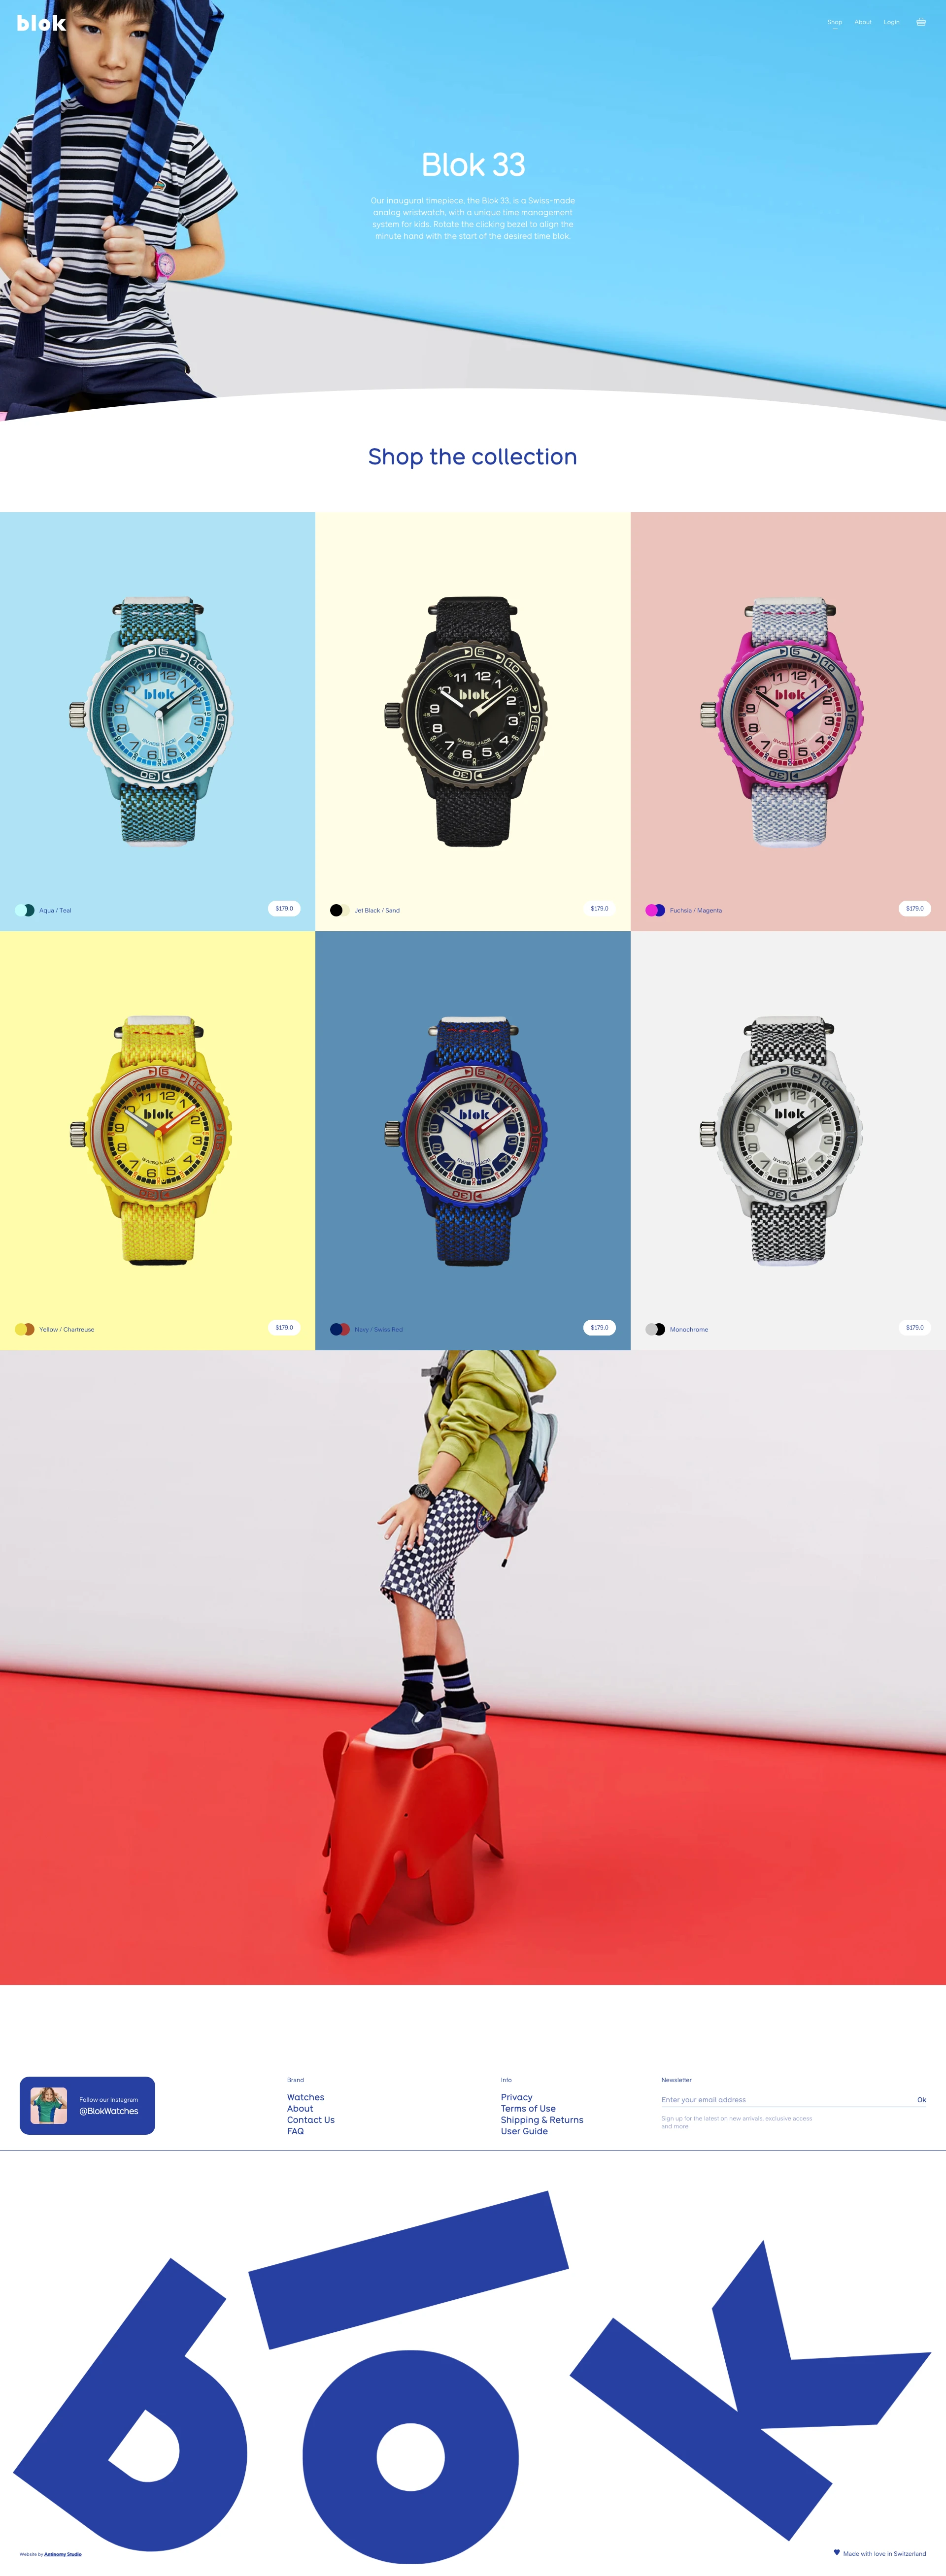 Blok Watches Landing Page Example: Blok 33 is a Swiss-made mechanical wristwatch for kids featuring a Swiss ETA movement, sapphire glass, and a stainless steel screw down crown, all housed in a bio-polymer case, waterproof to 100m.